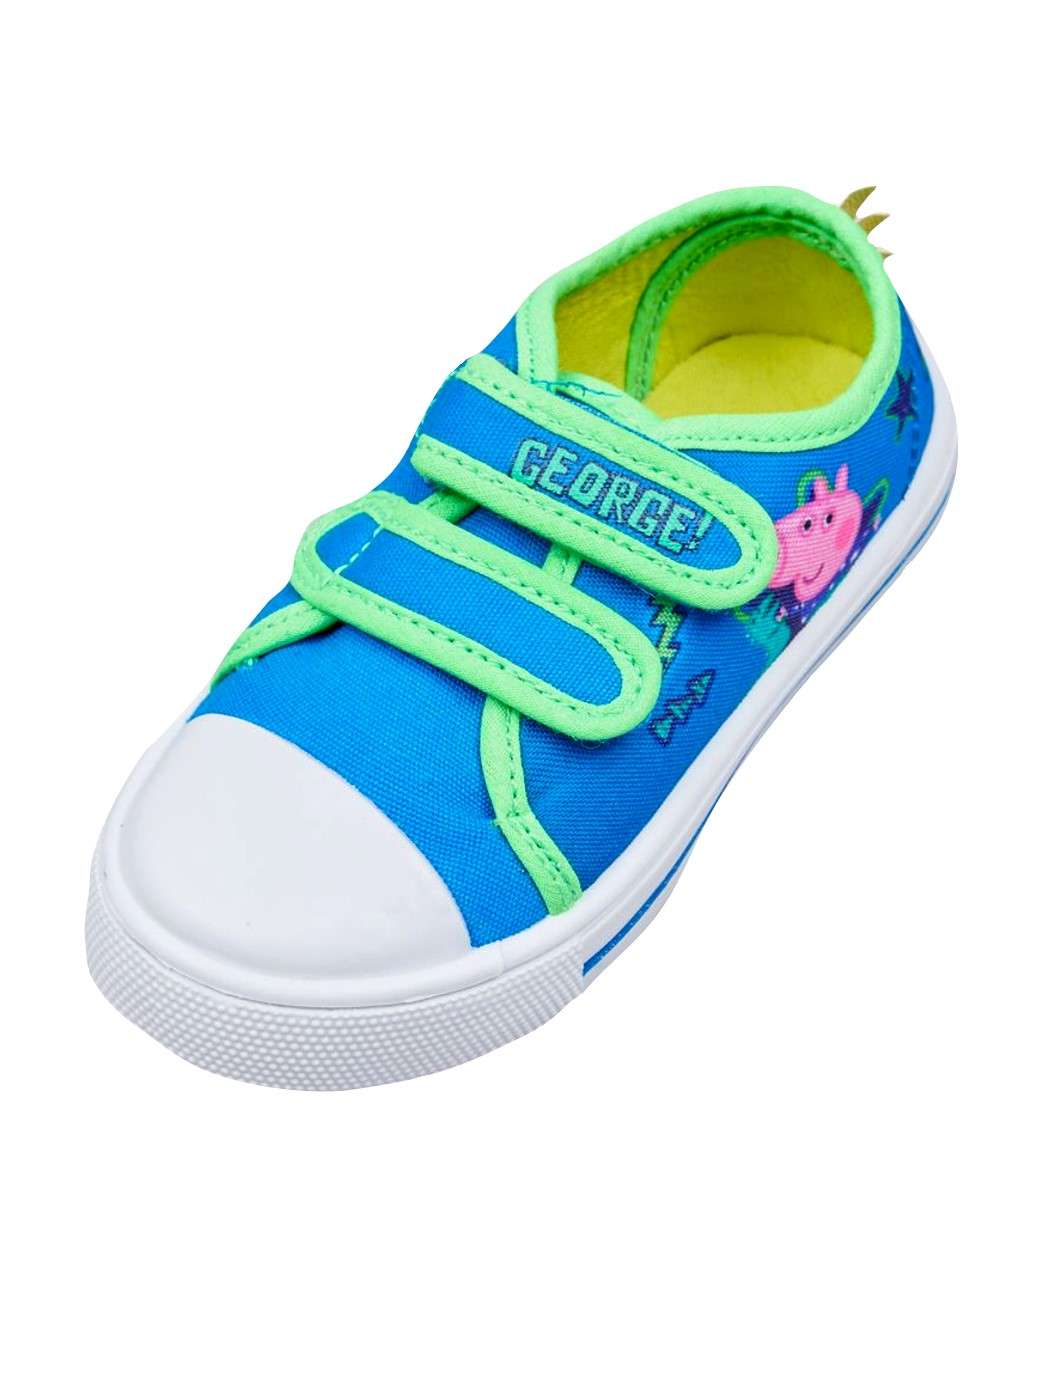 Peppa Pig George Pig Boys Easy Close Canvas Pumps Low Top Trainers